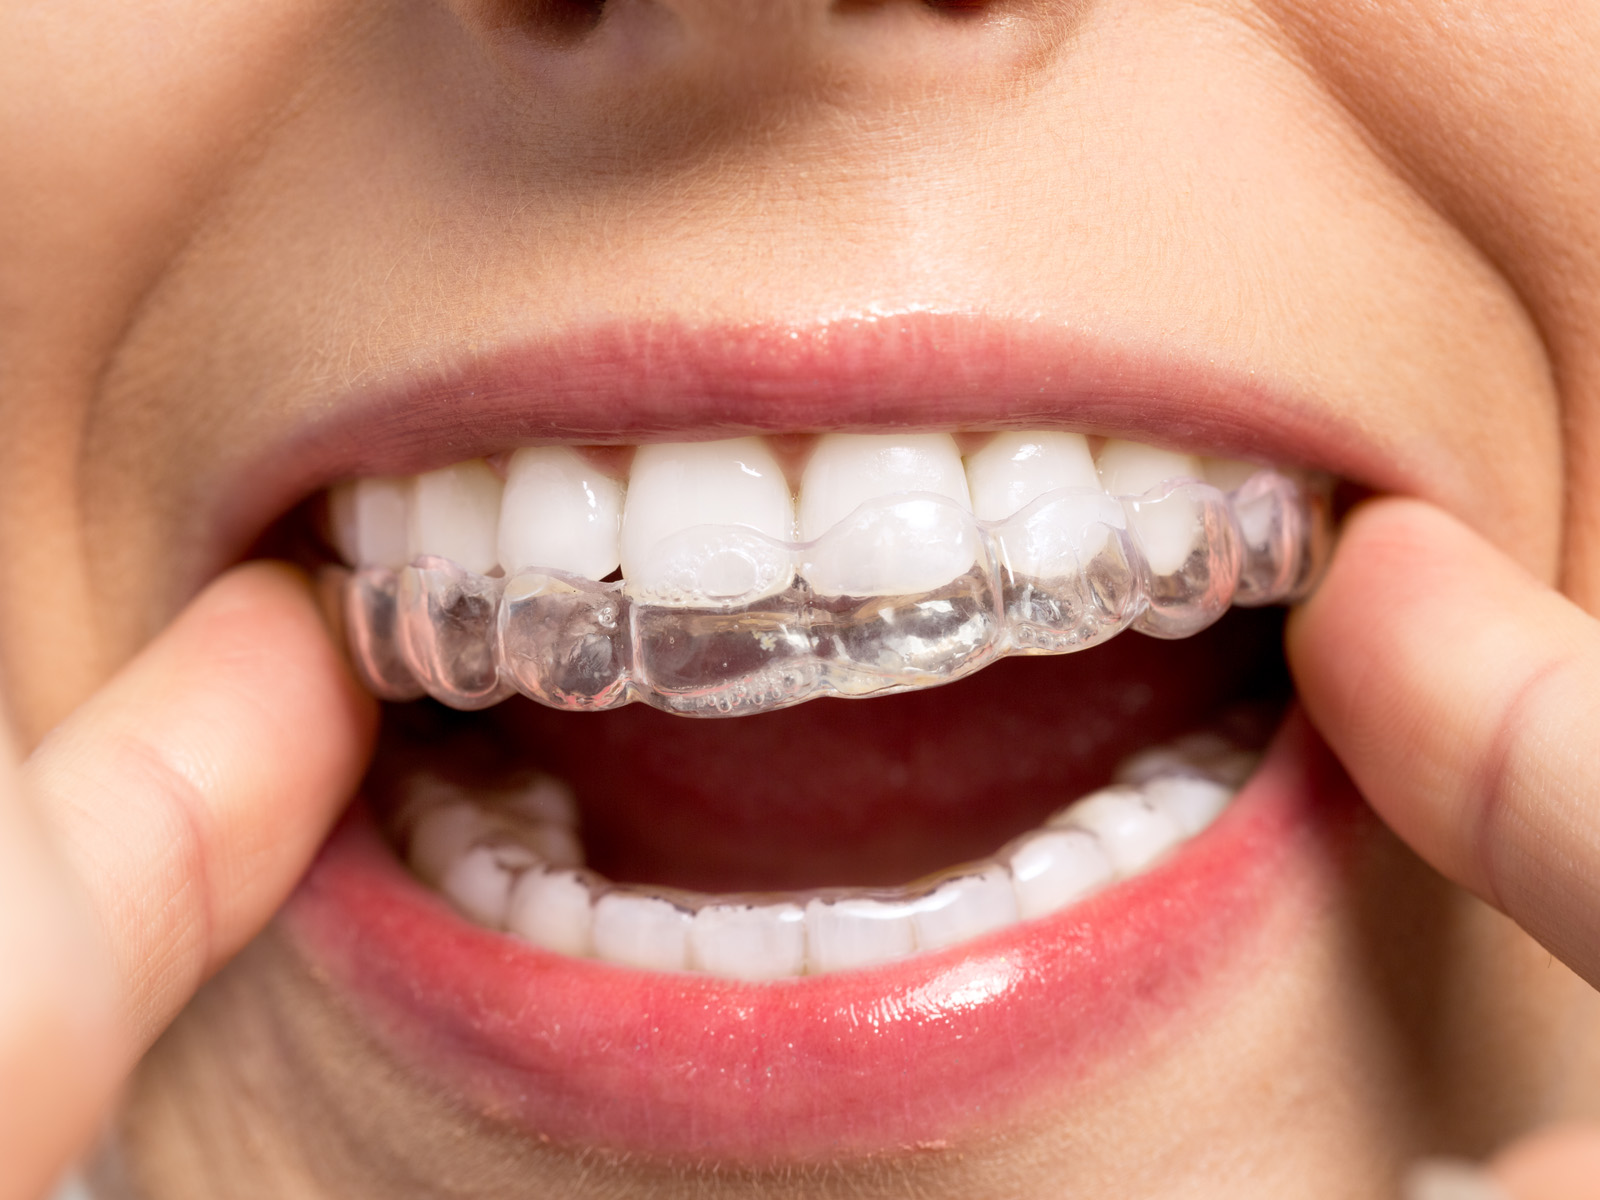 Can you eat with Invisalign?